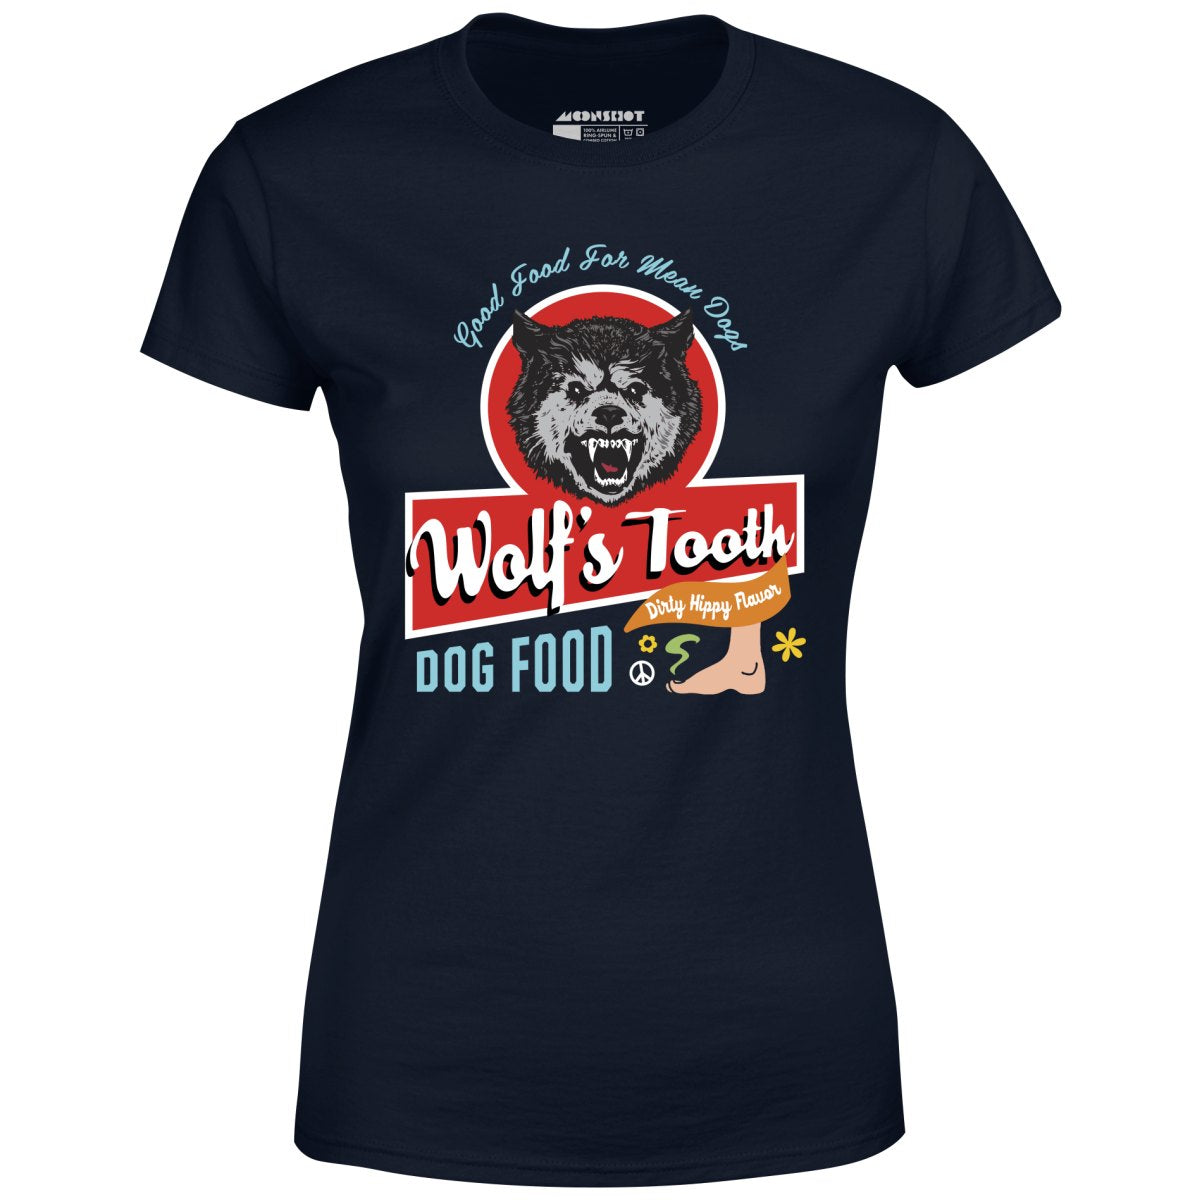 Wolf's Tooth Dog Food - Women's T-Shirt